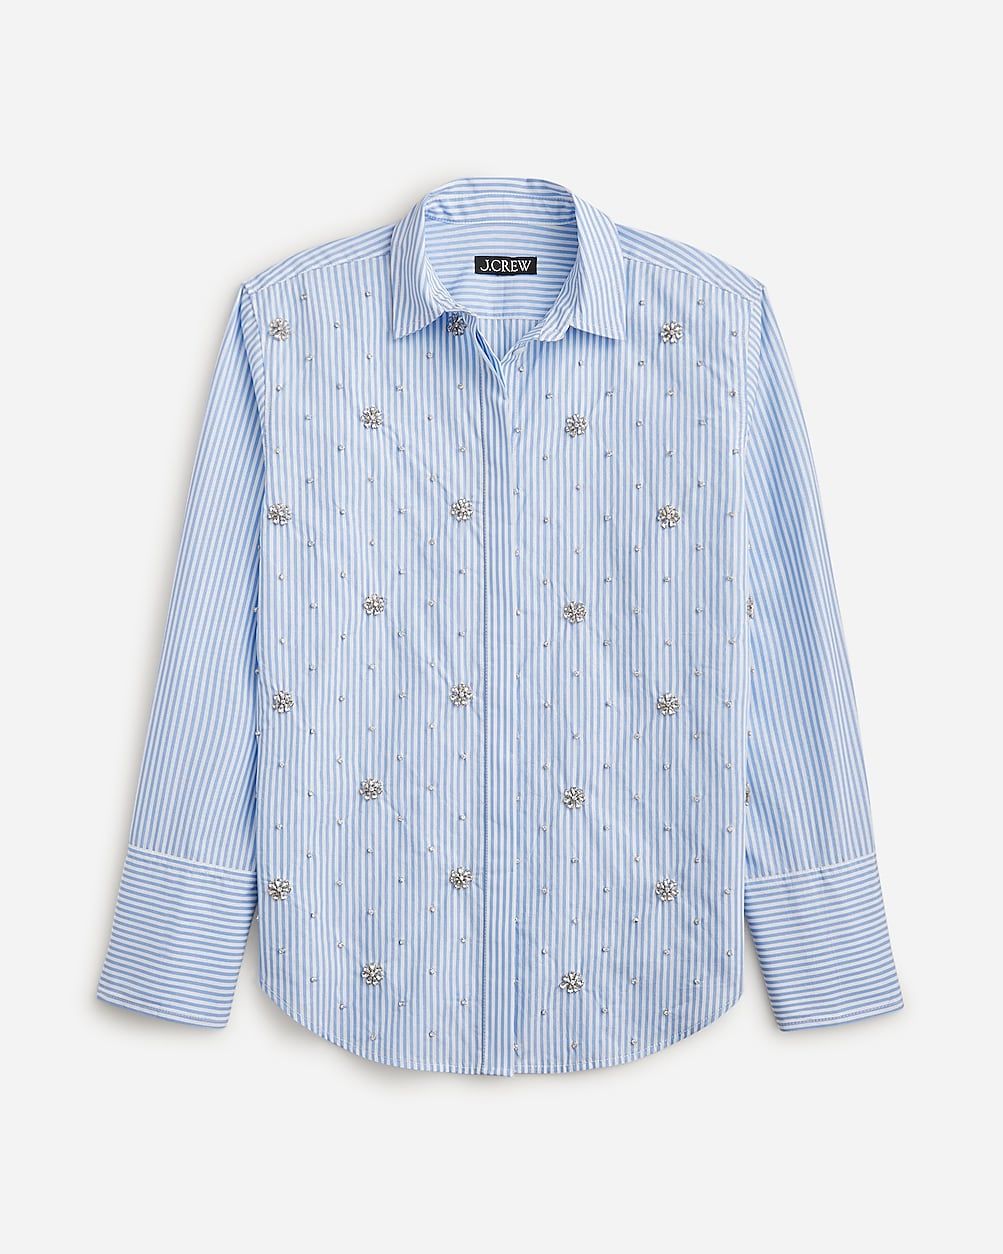 Collection gar&ccedil;on embellished shirt in blue pinstripe | J.Crew US